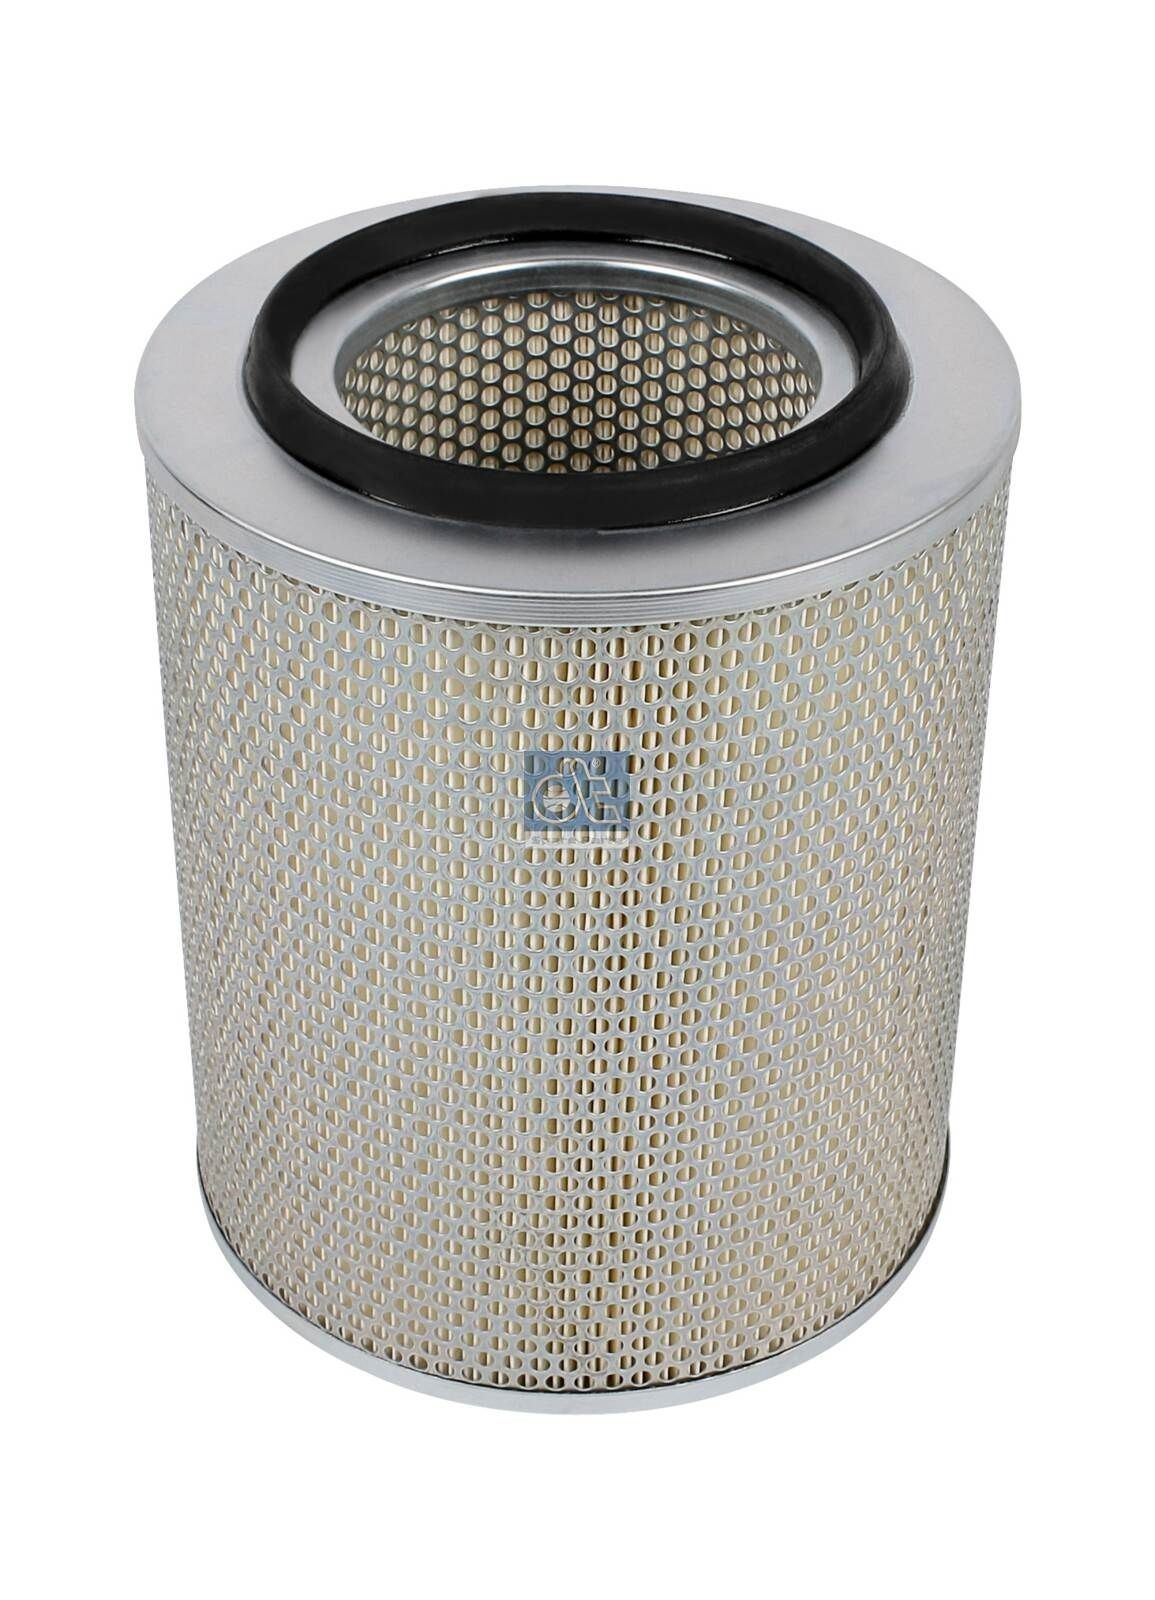 DT Spare Parts 286mm, 243mm, Filter Insert Height: 286mm Engine air filter 7.17010 buy